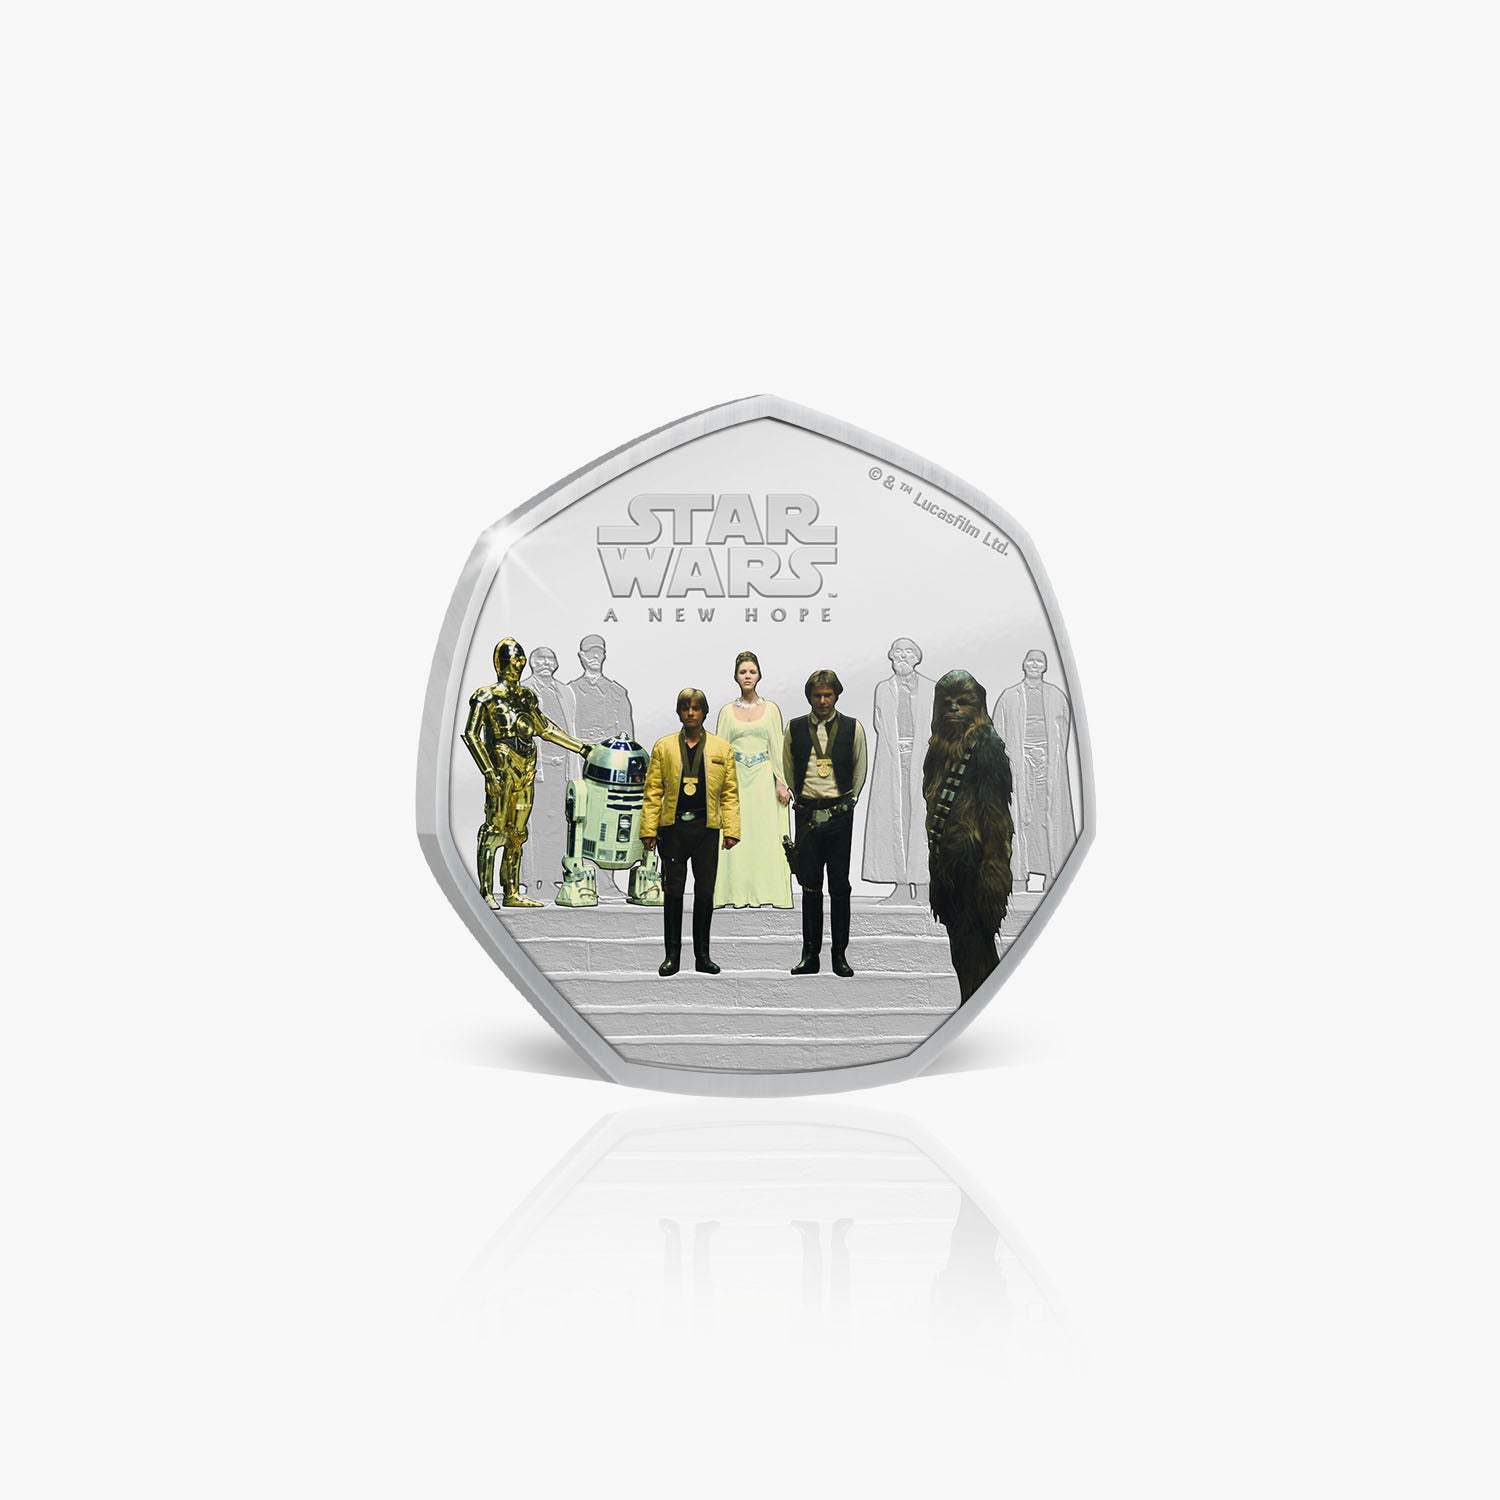 A New Hope - Medal Ceremony Silver Plated Coin